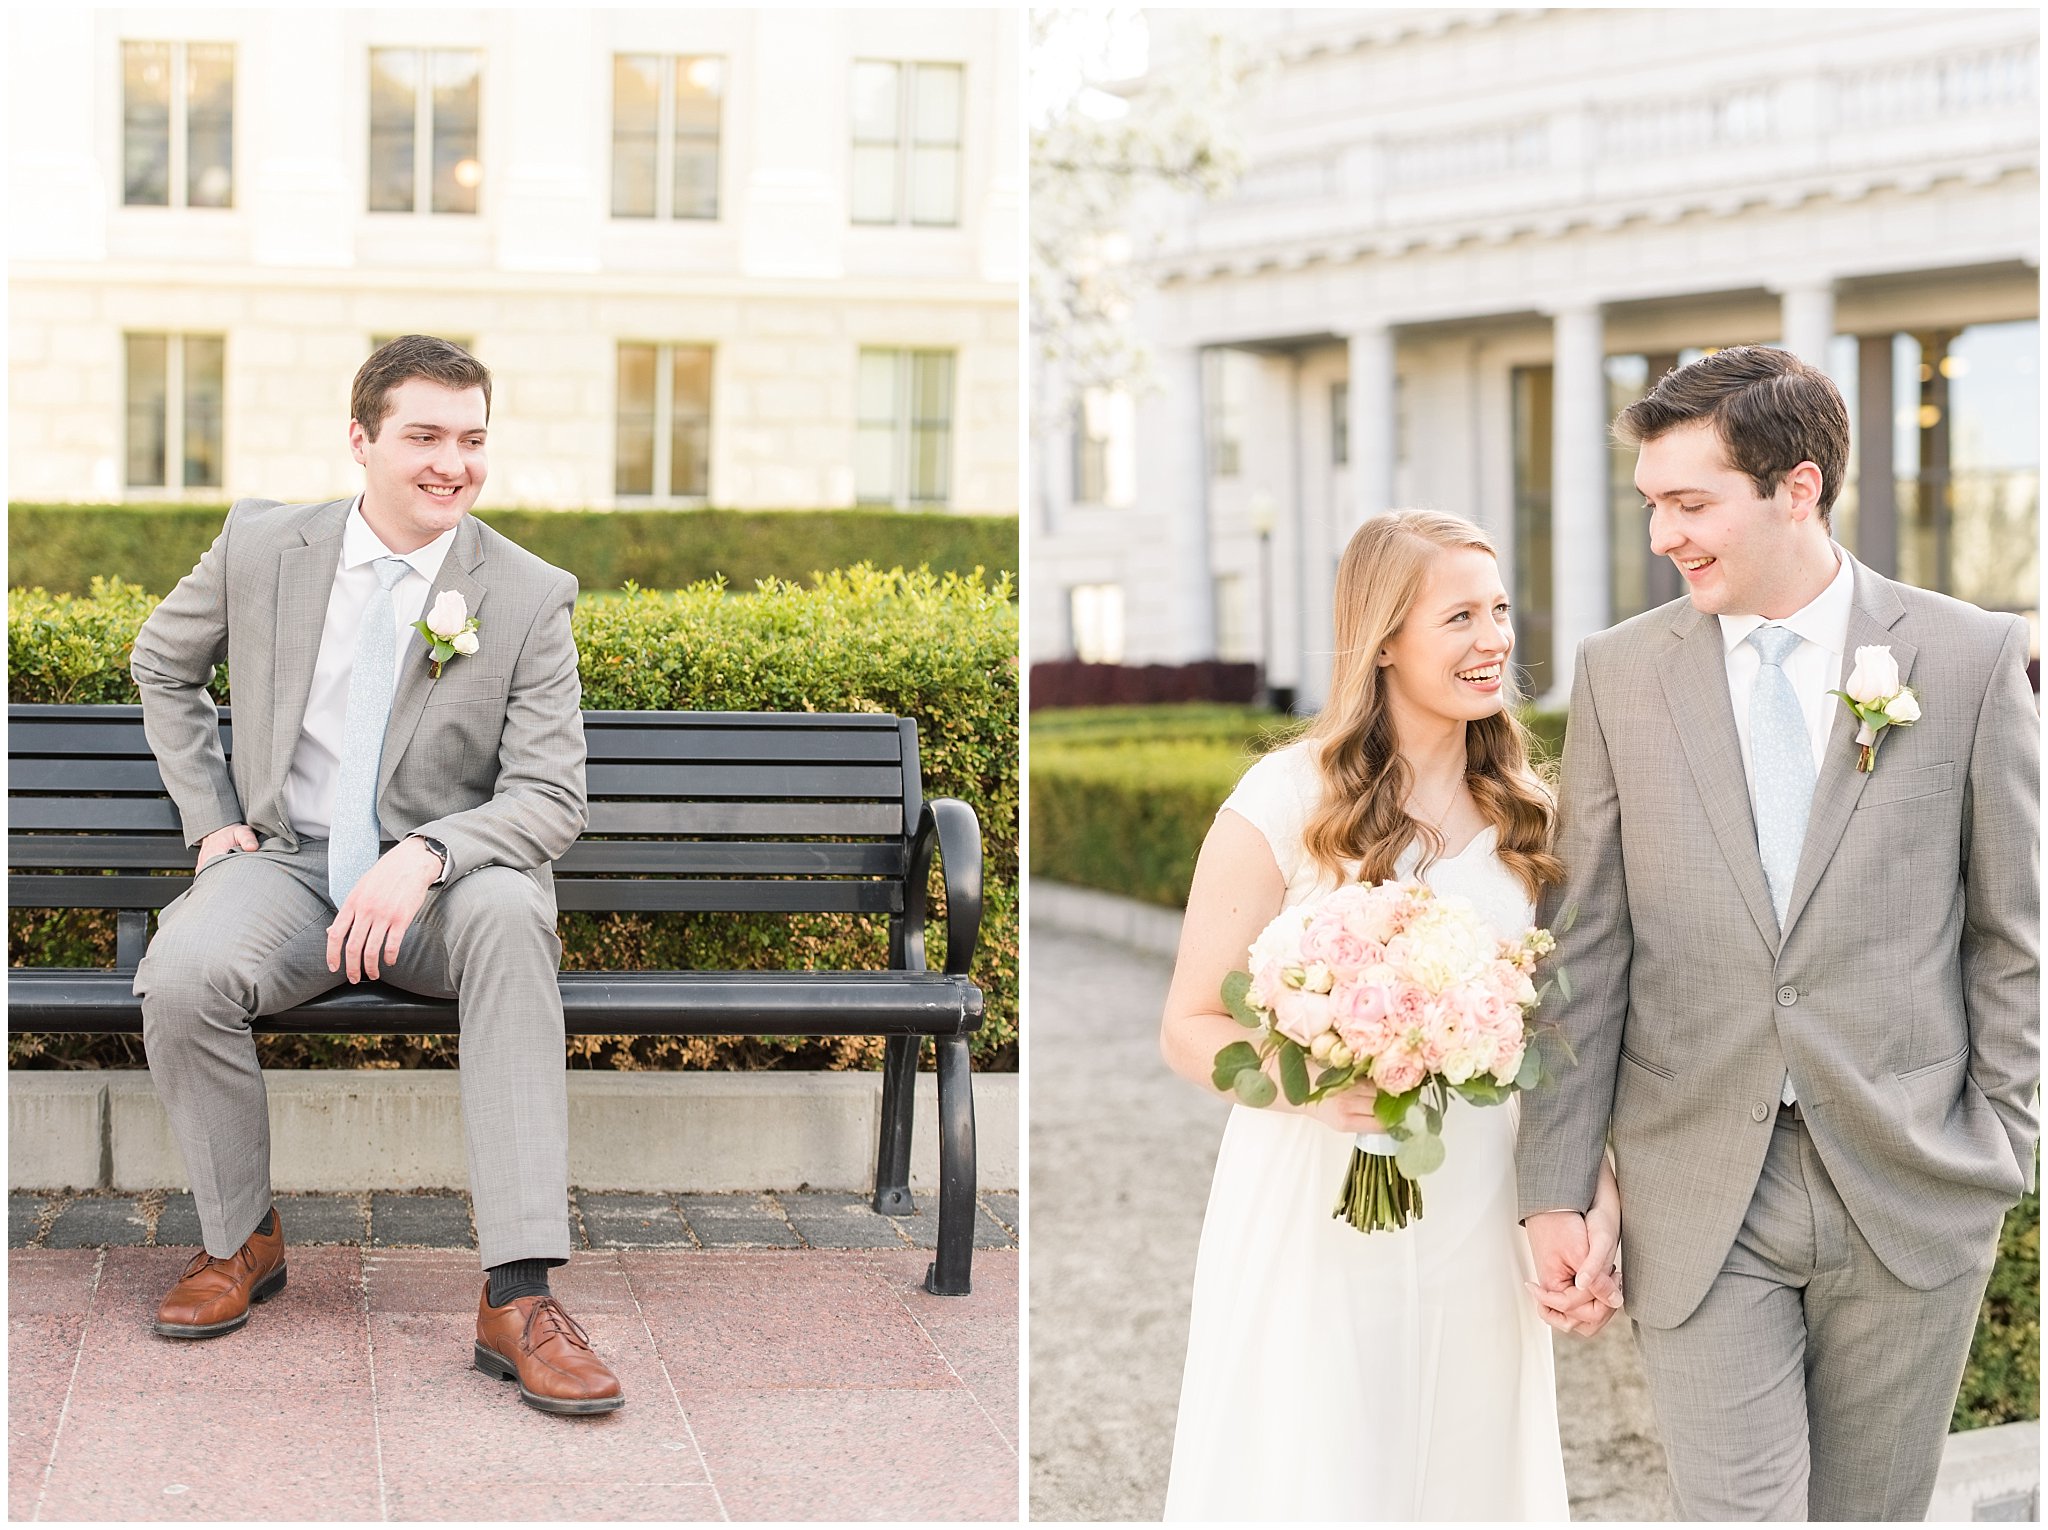 Bride with blush bouquet and groom with grey suit in the blossoms | Utah State Capitol Blossoms Formal Session | Salt Lake Wedding Photographers | Jessie and Dallin Photography